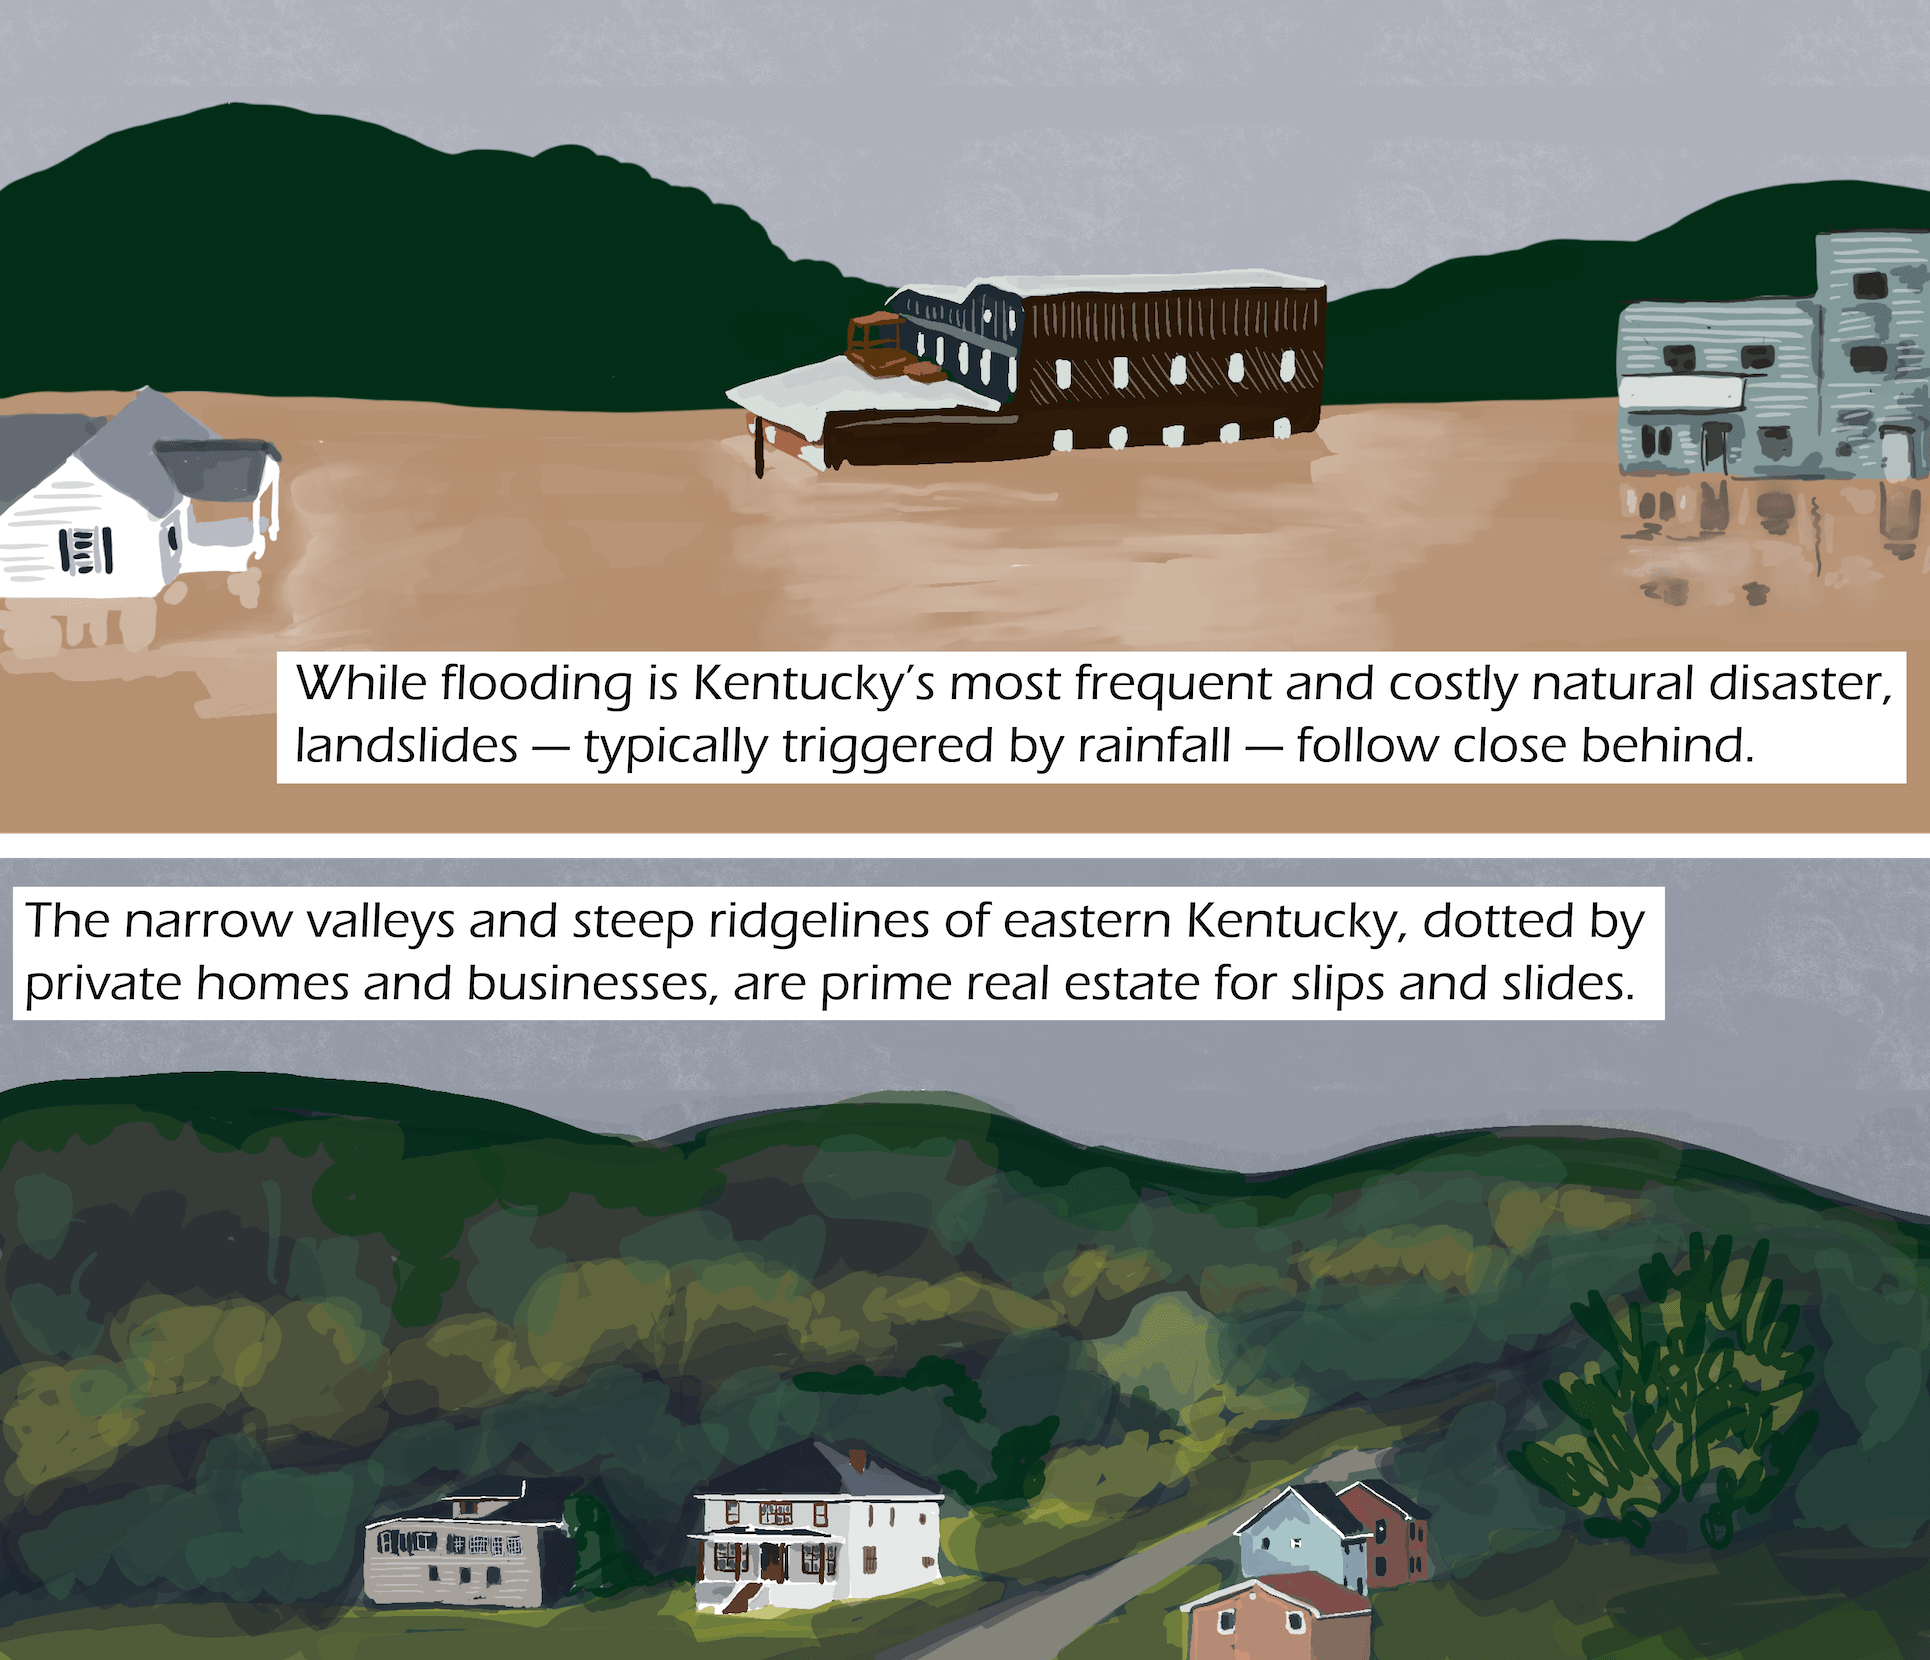 top image: several buildings flooded by muddy brown water. Text: While flooding is Kentucky’s most frequent and costly natural disaster, landslides — typically triggered by rainfall — follow close behind. Bottom: green hills and the tops of several buildings. Text: The narrow valleys and steep ridgelines of eastern Kentucky, dotted by private homes and businesses, are prime real estate for slips and slides.